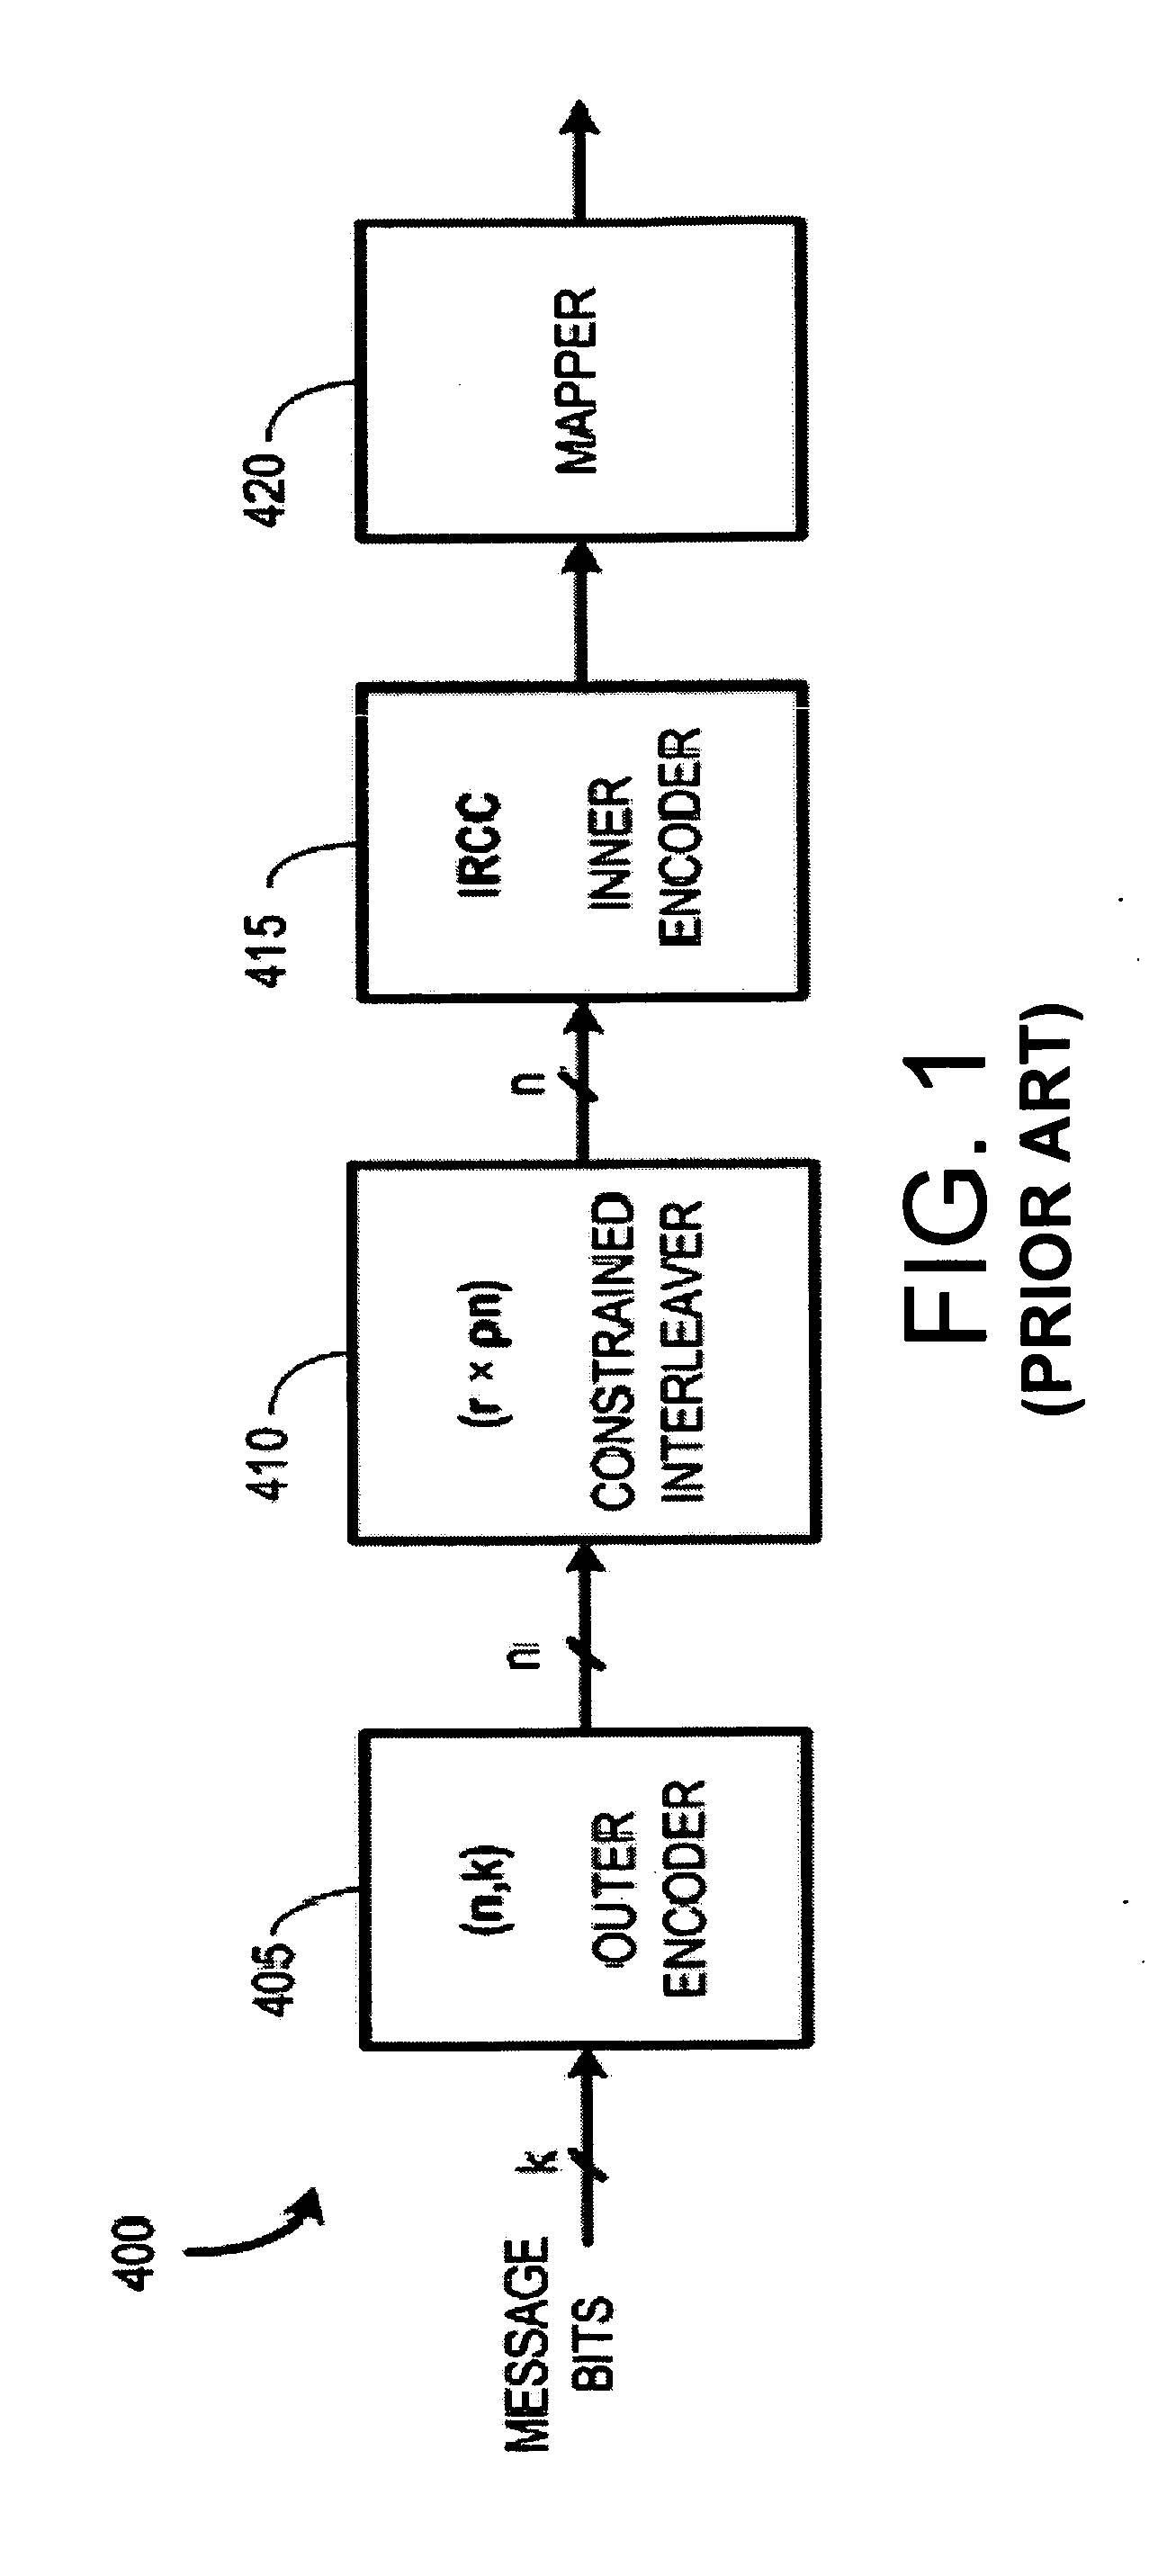 Parallel VLSI architectures for constrained turbo block convolutional decoding